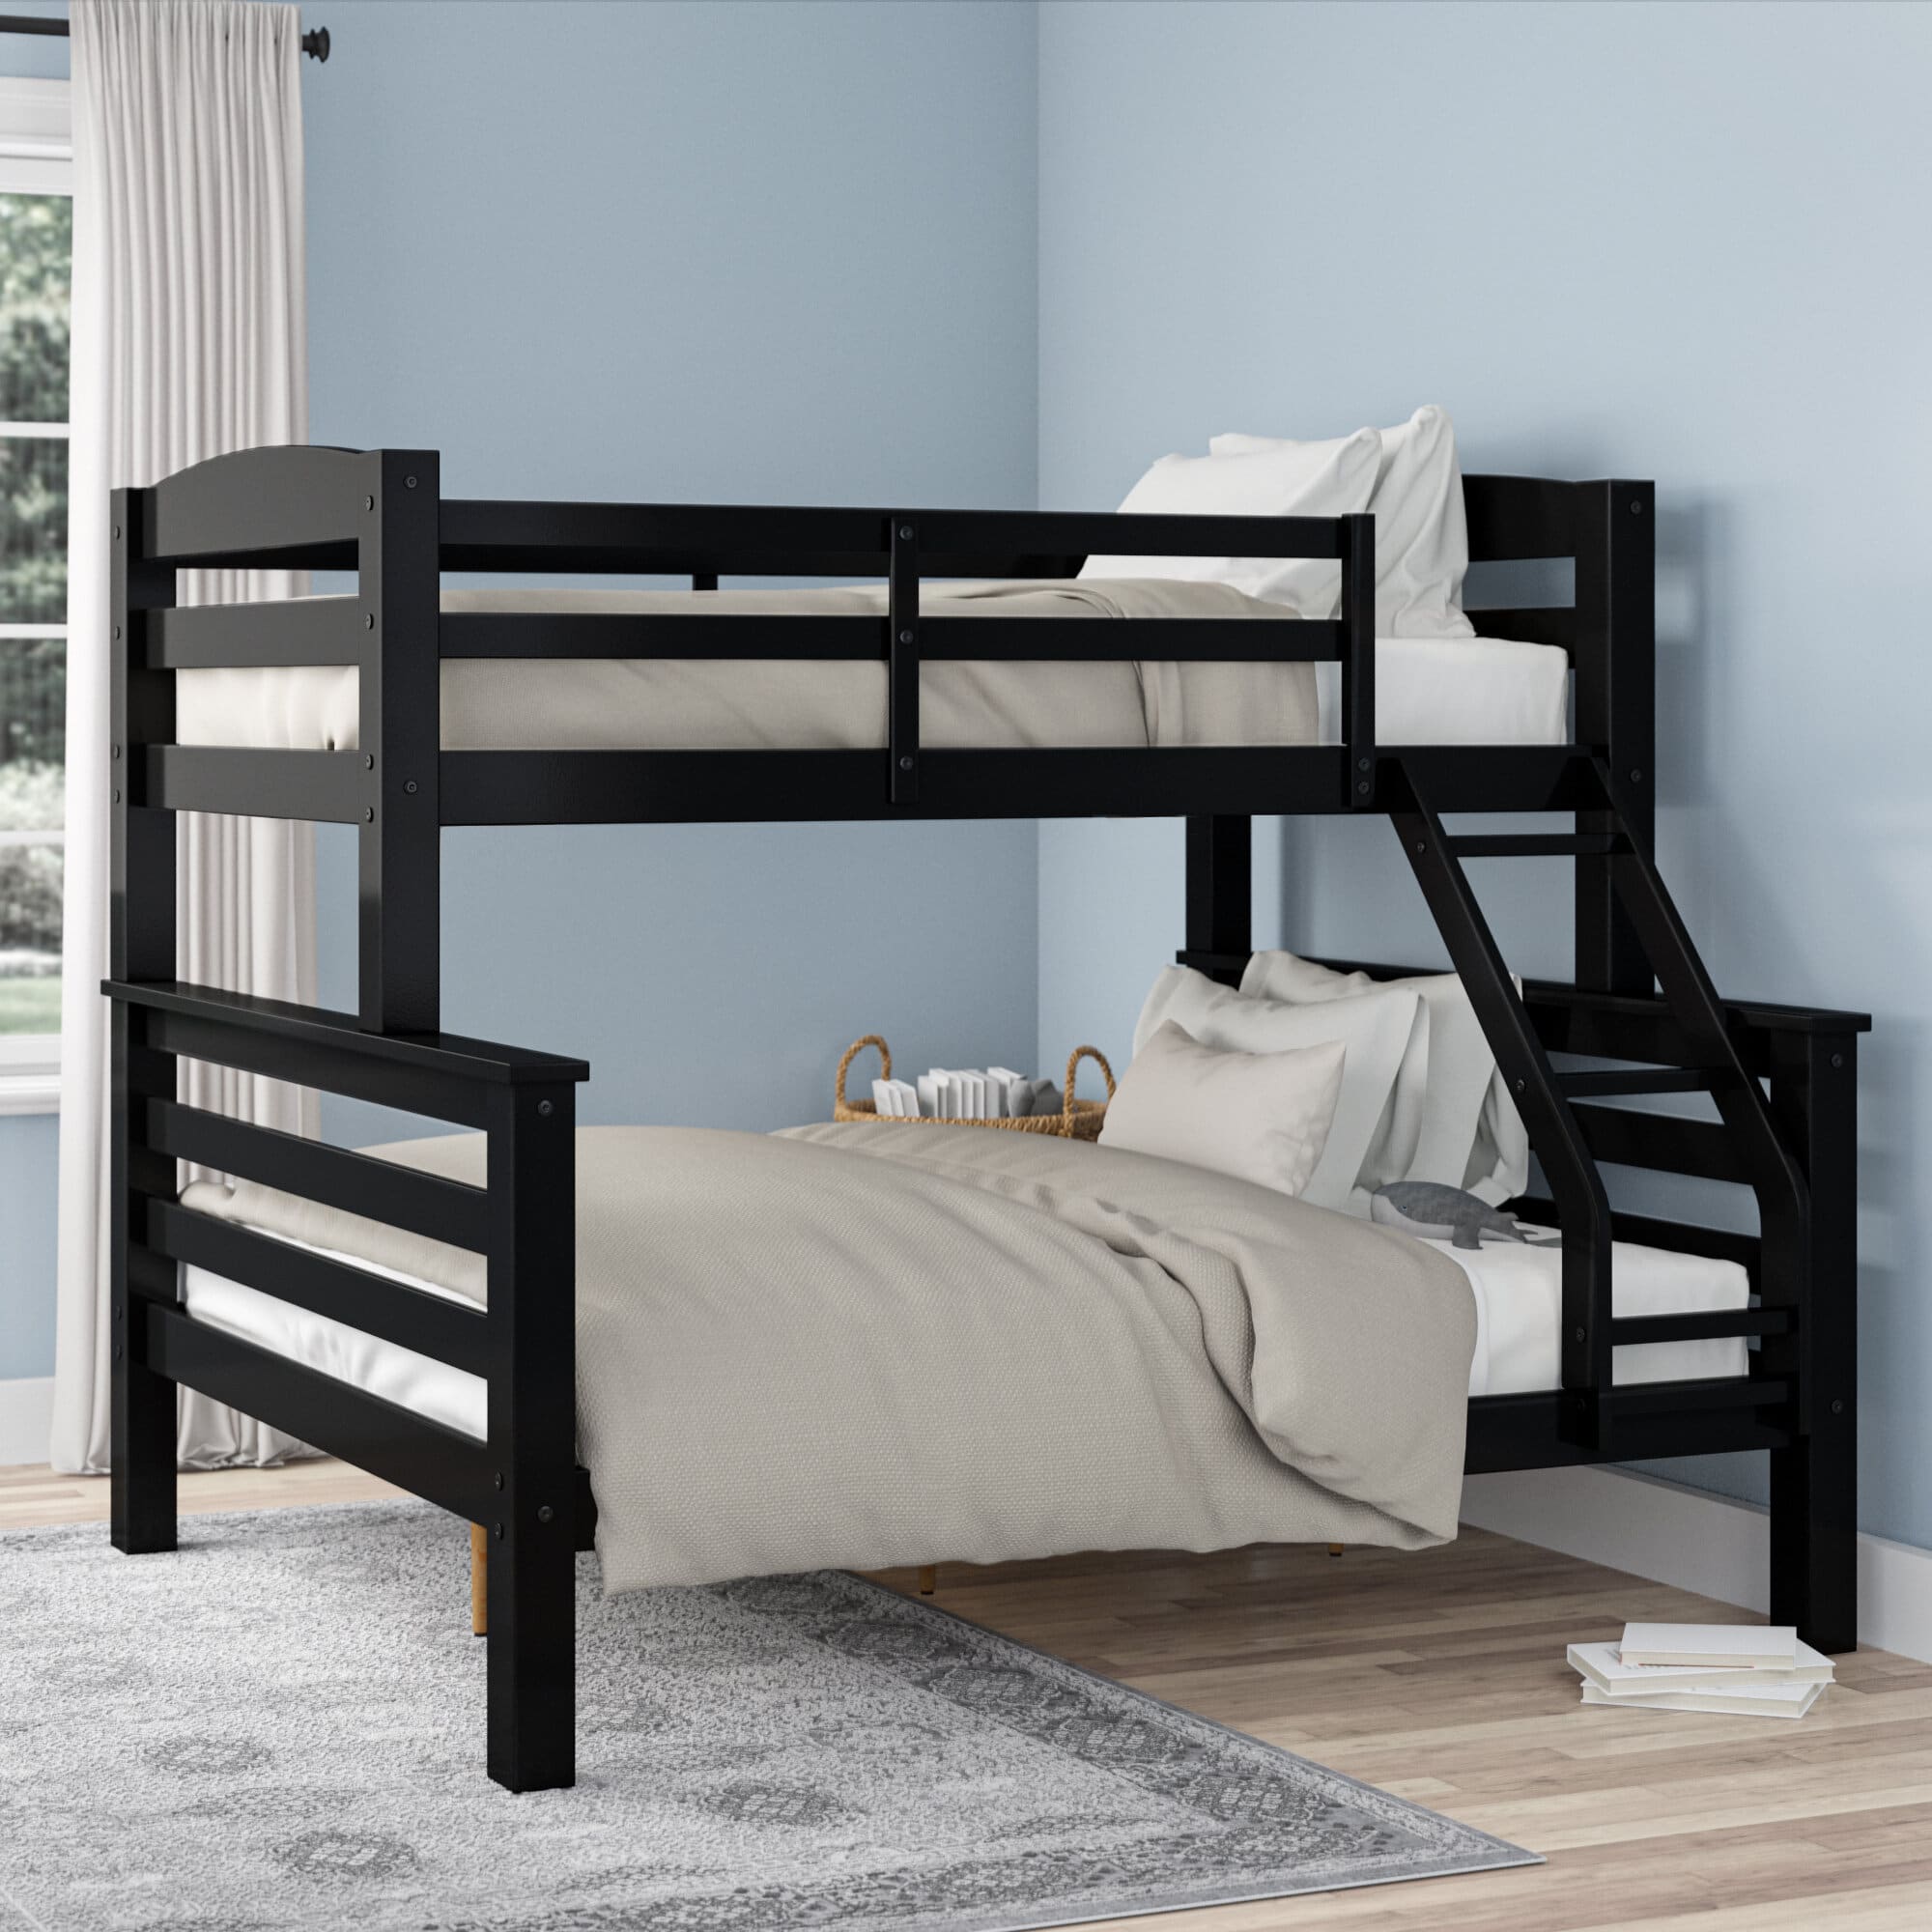 6 Best Twin Over Full Bunk Beds May, Convertible Bunk Beds Full Over Full